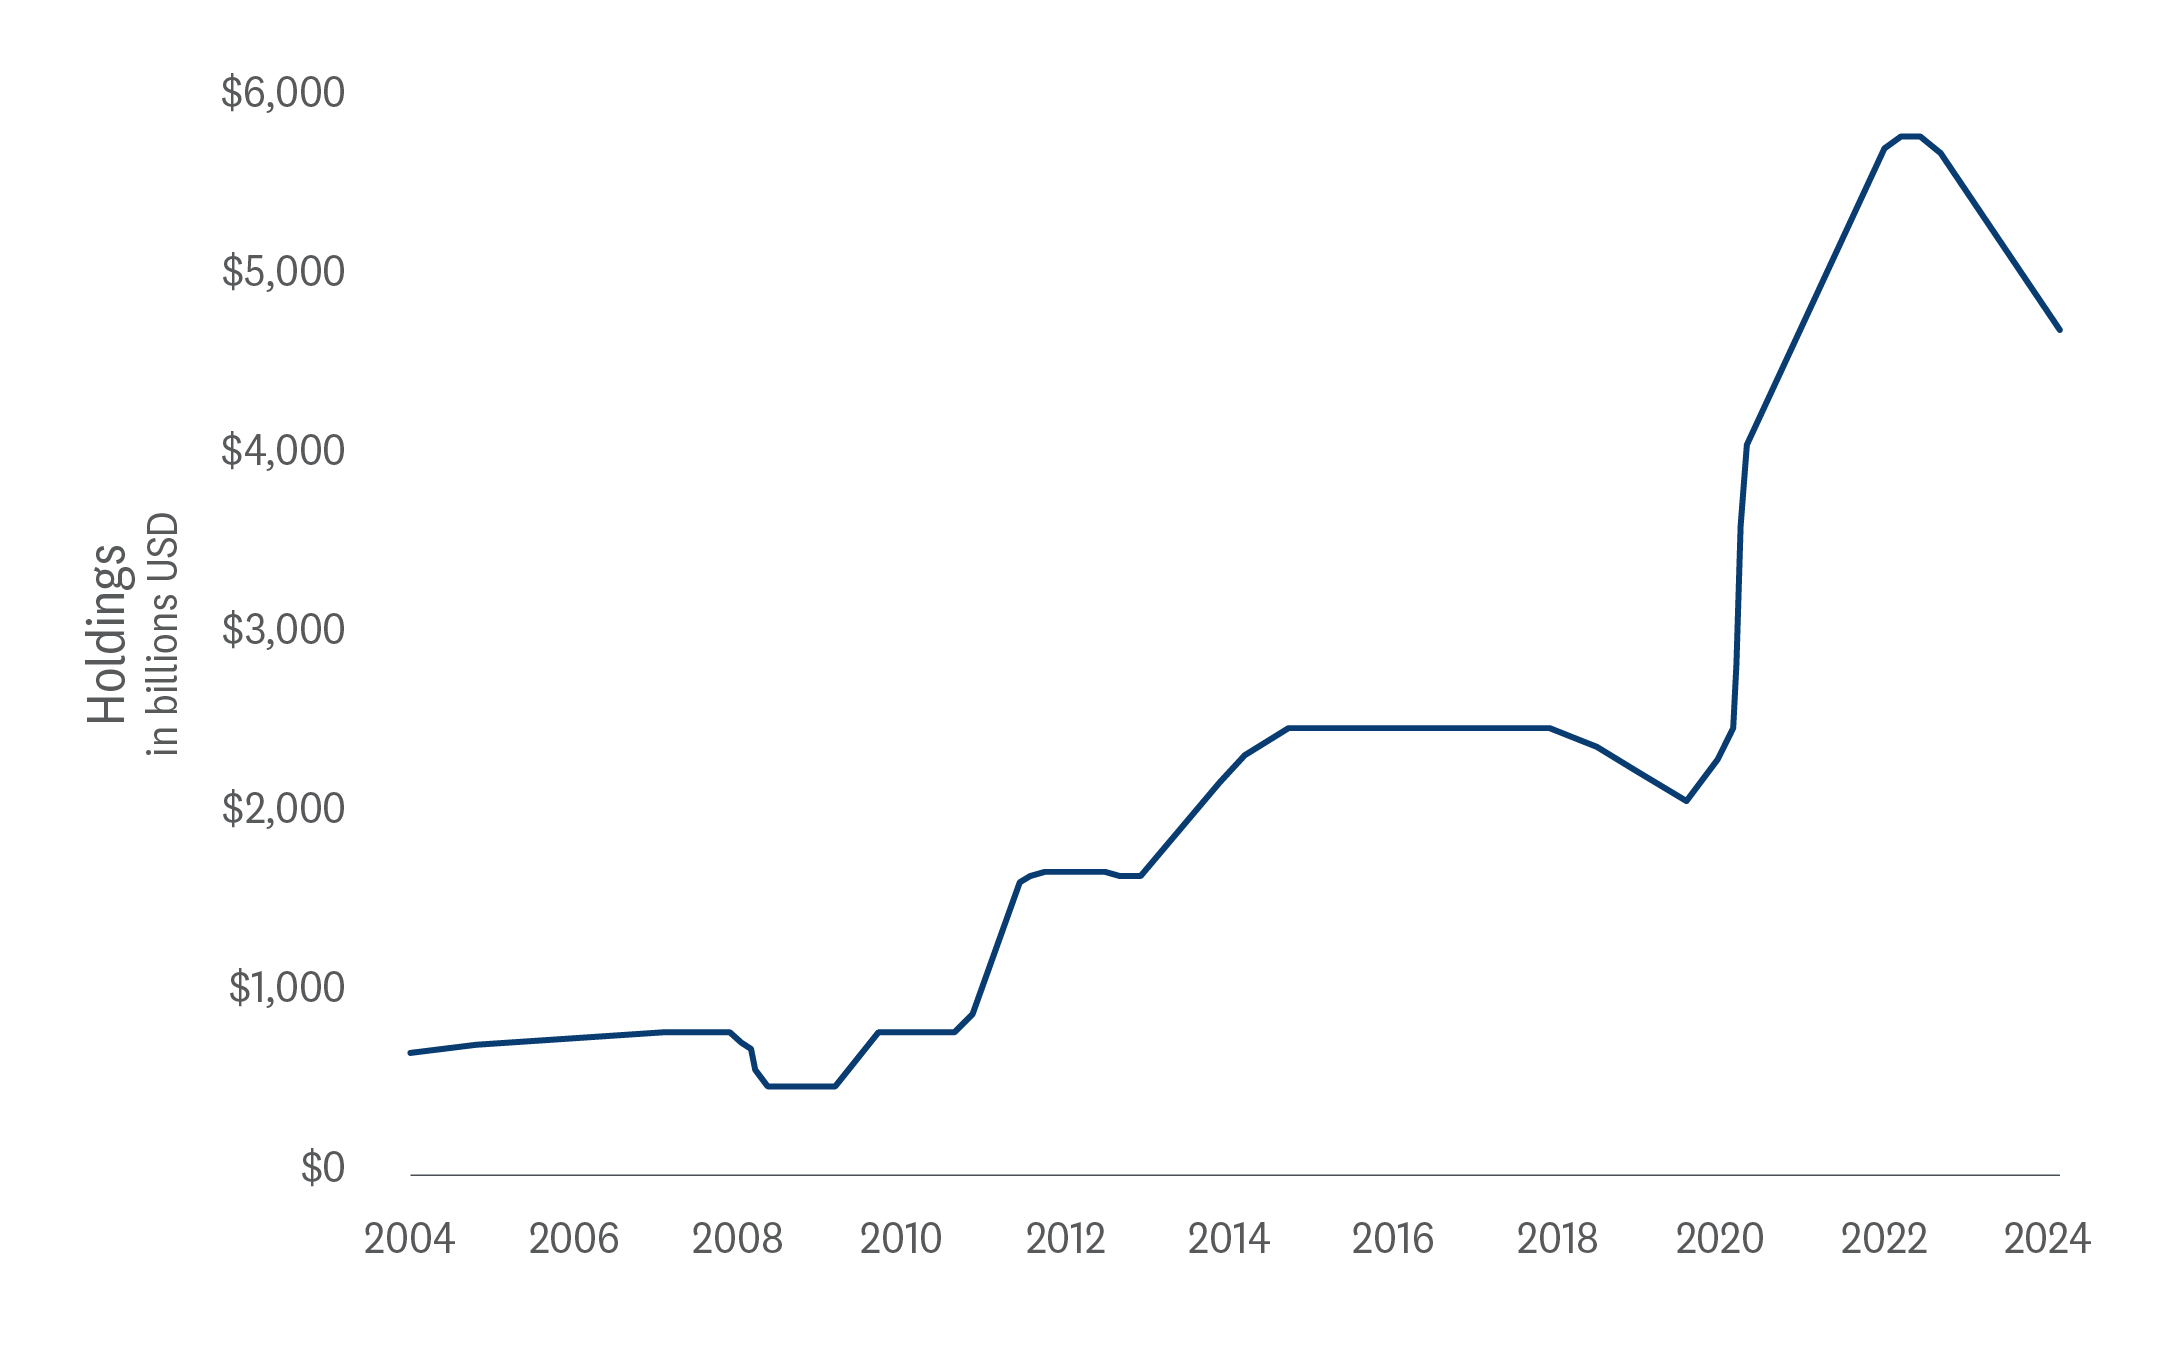 Line graph of Federal Reserve Ownership of U.S. Treasuries from 2004 to 2024.   The Federal Reserve owned less than $1 trillion in U.S. Treasuries until late 2010. By 2016, the Federal Reserve owned $2.4 trillion and did not increase ownership until 2020, when a dramatic increase led to the Federal Reserve owning $5.7 trillion by 2022. Currently the Federal Reserve owns $4.69 trillion in U.S. Treasuries. 